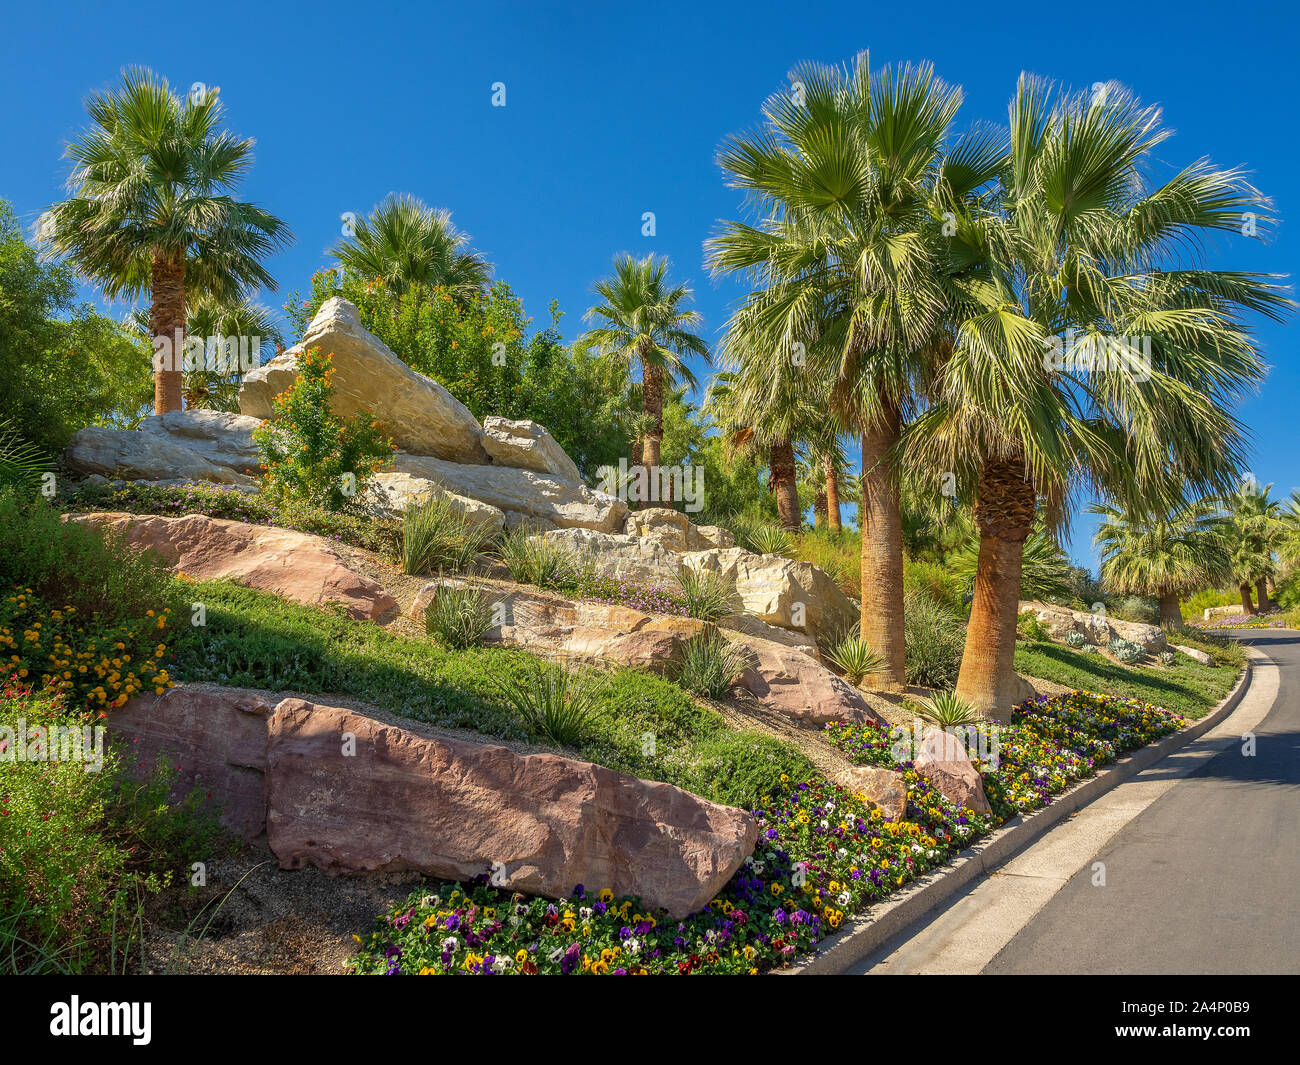 Manicured desert landscaping including palm trees, plants, flowers, Stock Photo